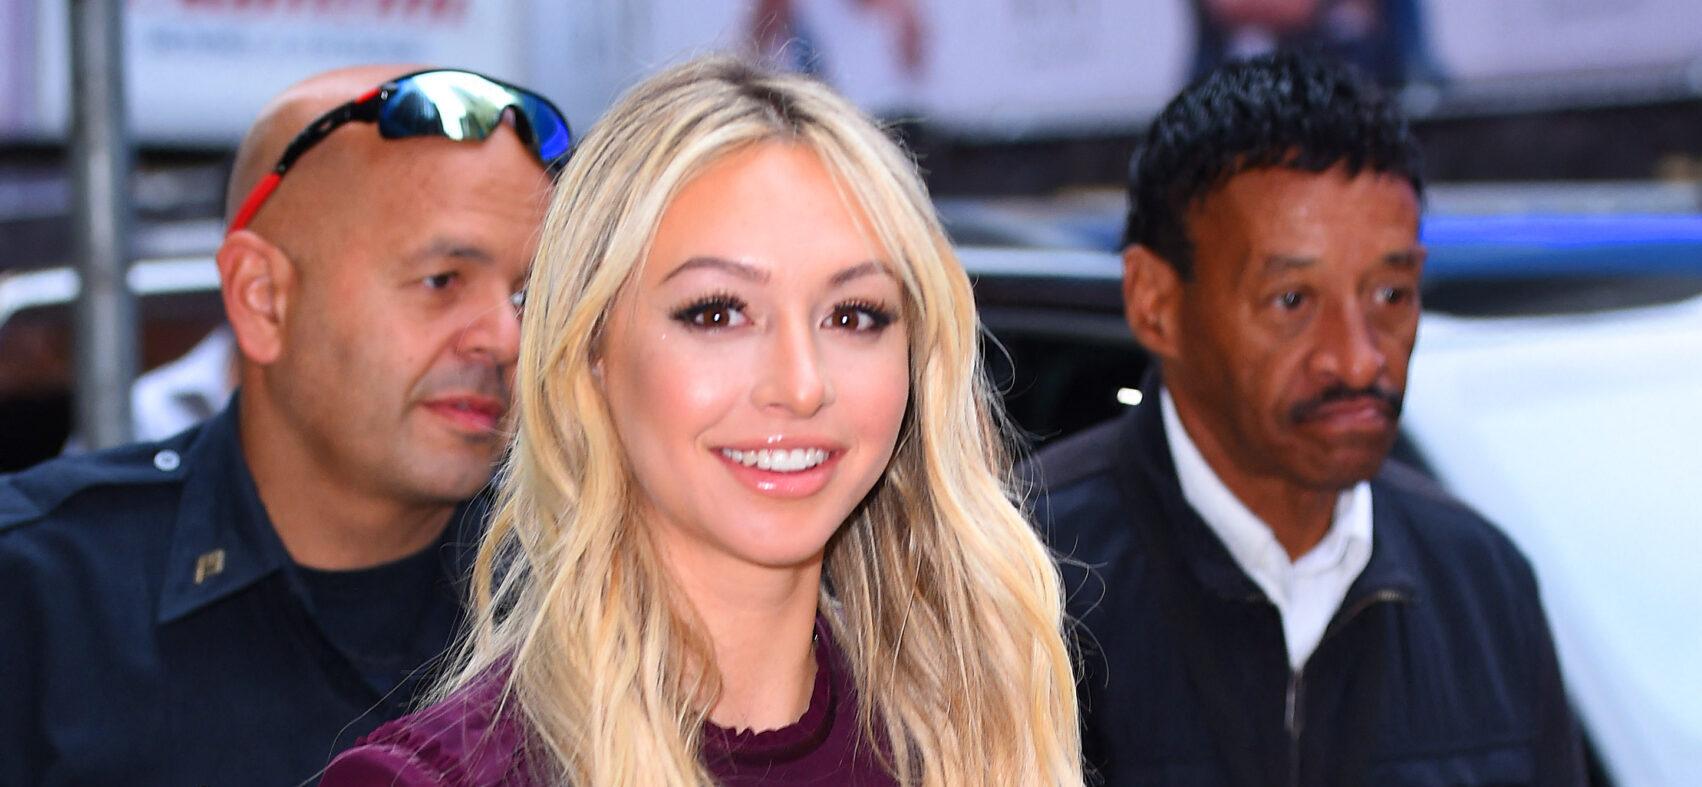 Corinne Olympios Shows Off Body In Tight Jeans: ‘Born To Ride’